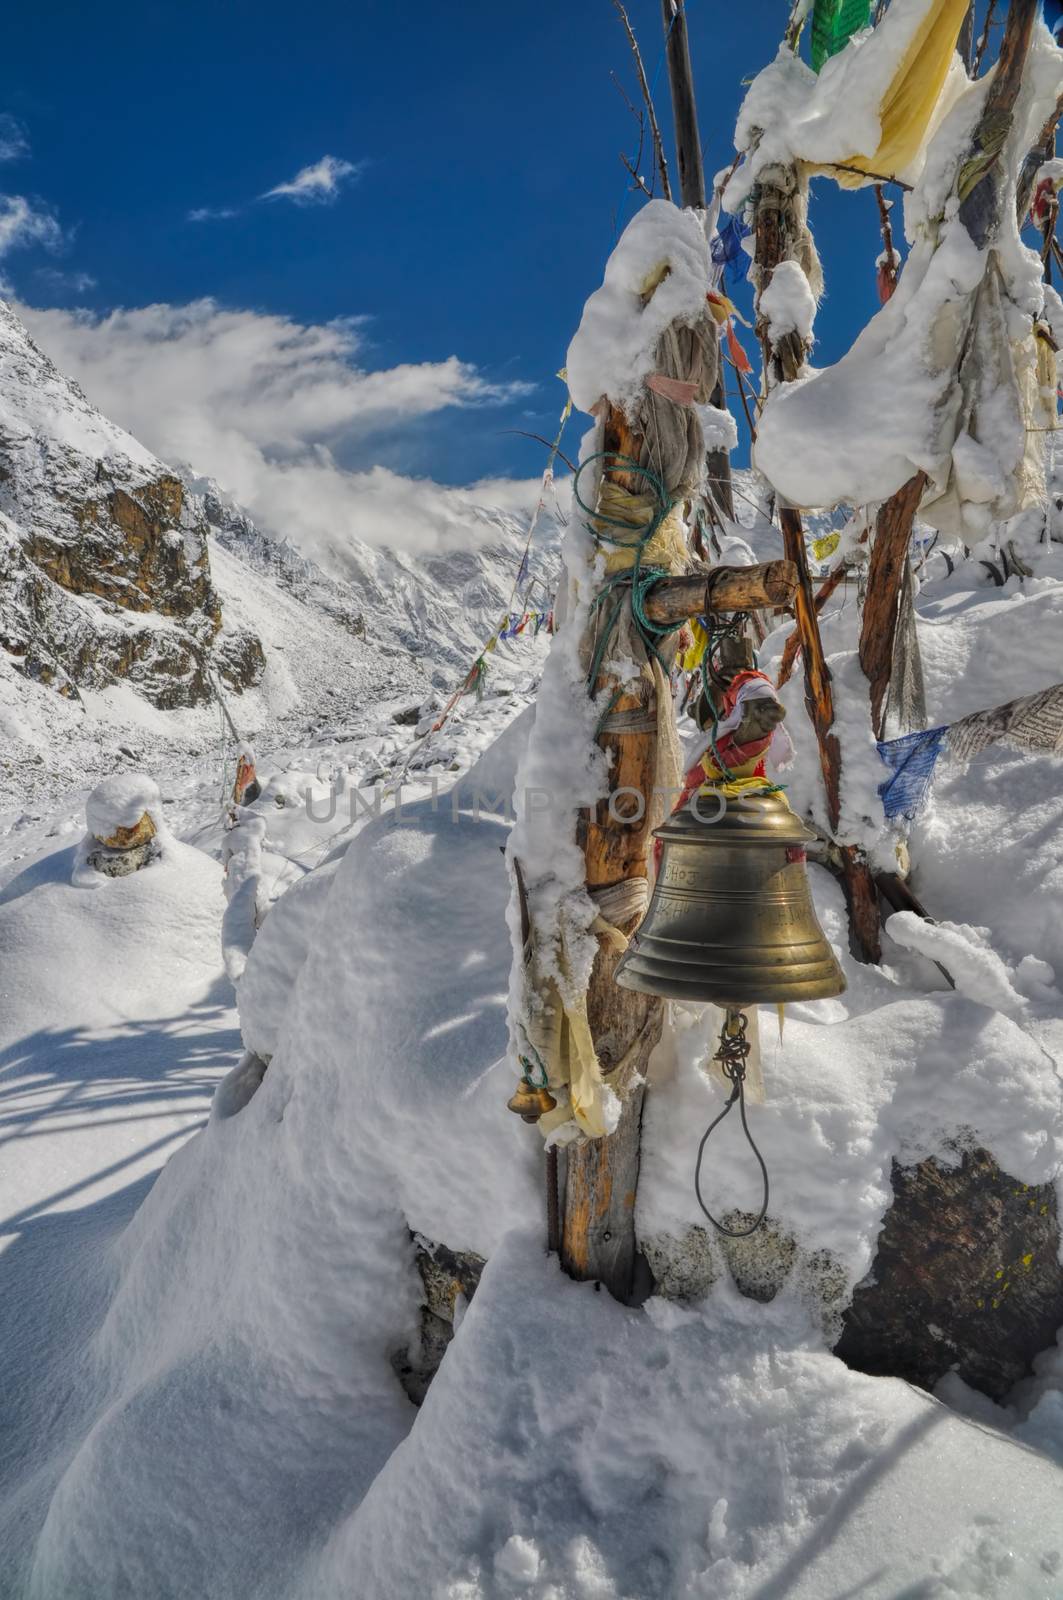 Buddhist bell and prayer flags in Himalayas near Kanchenjunga, the third tallest mountain in the world